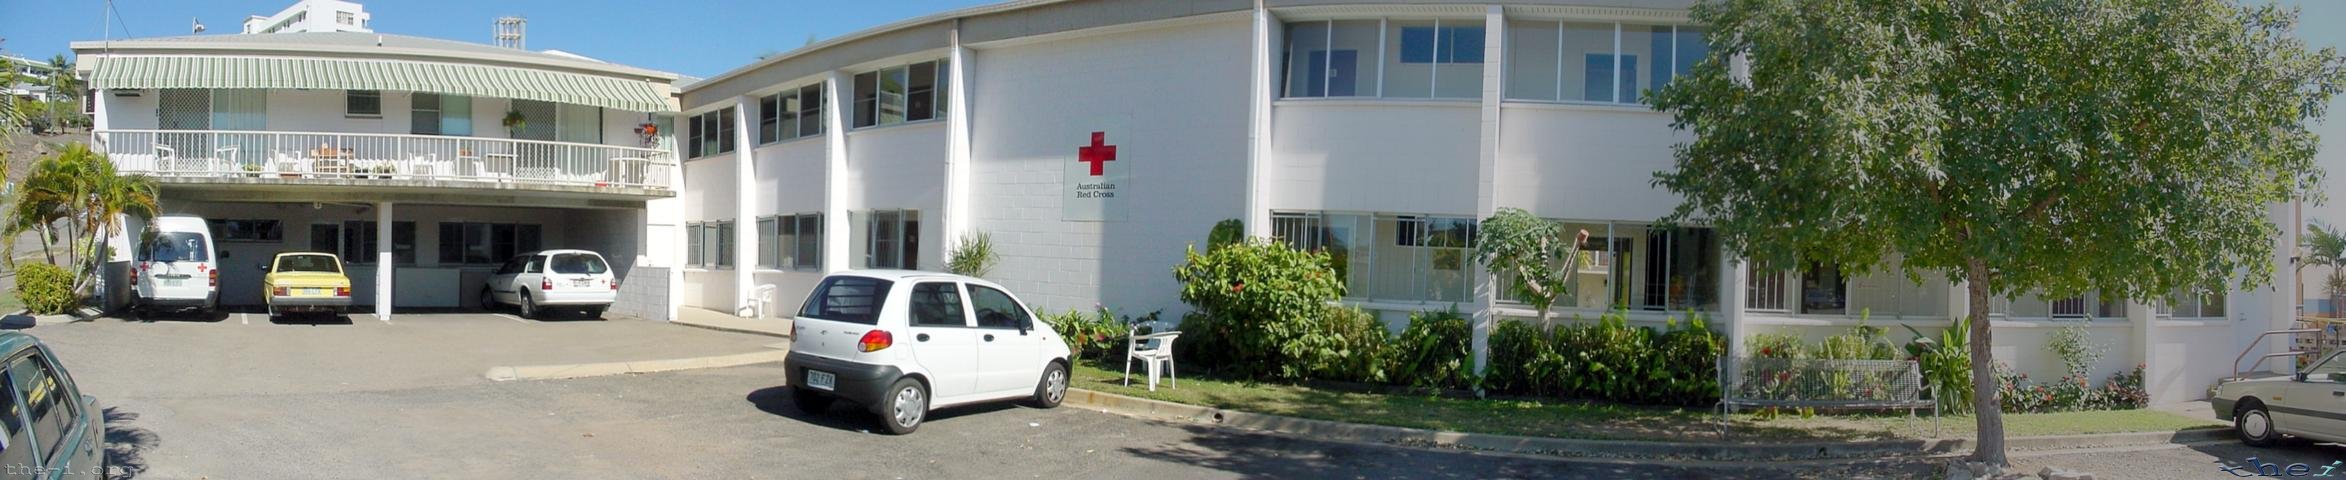 Red Cross House Townsville